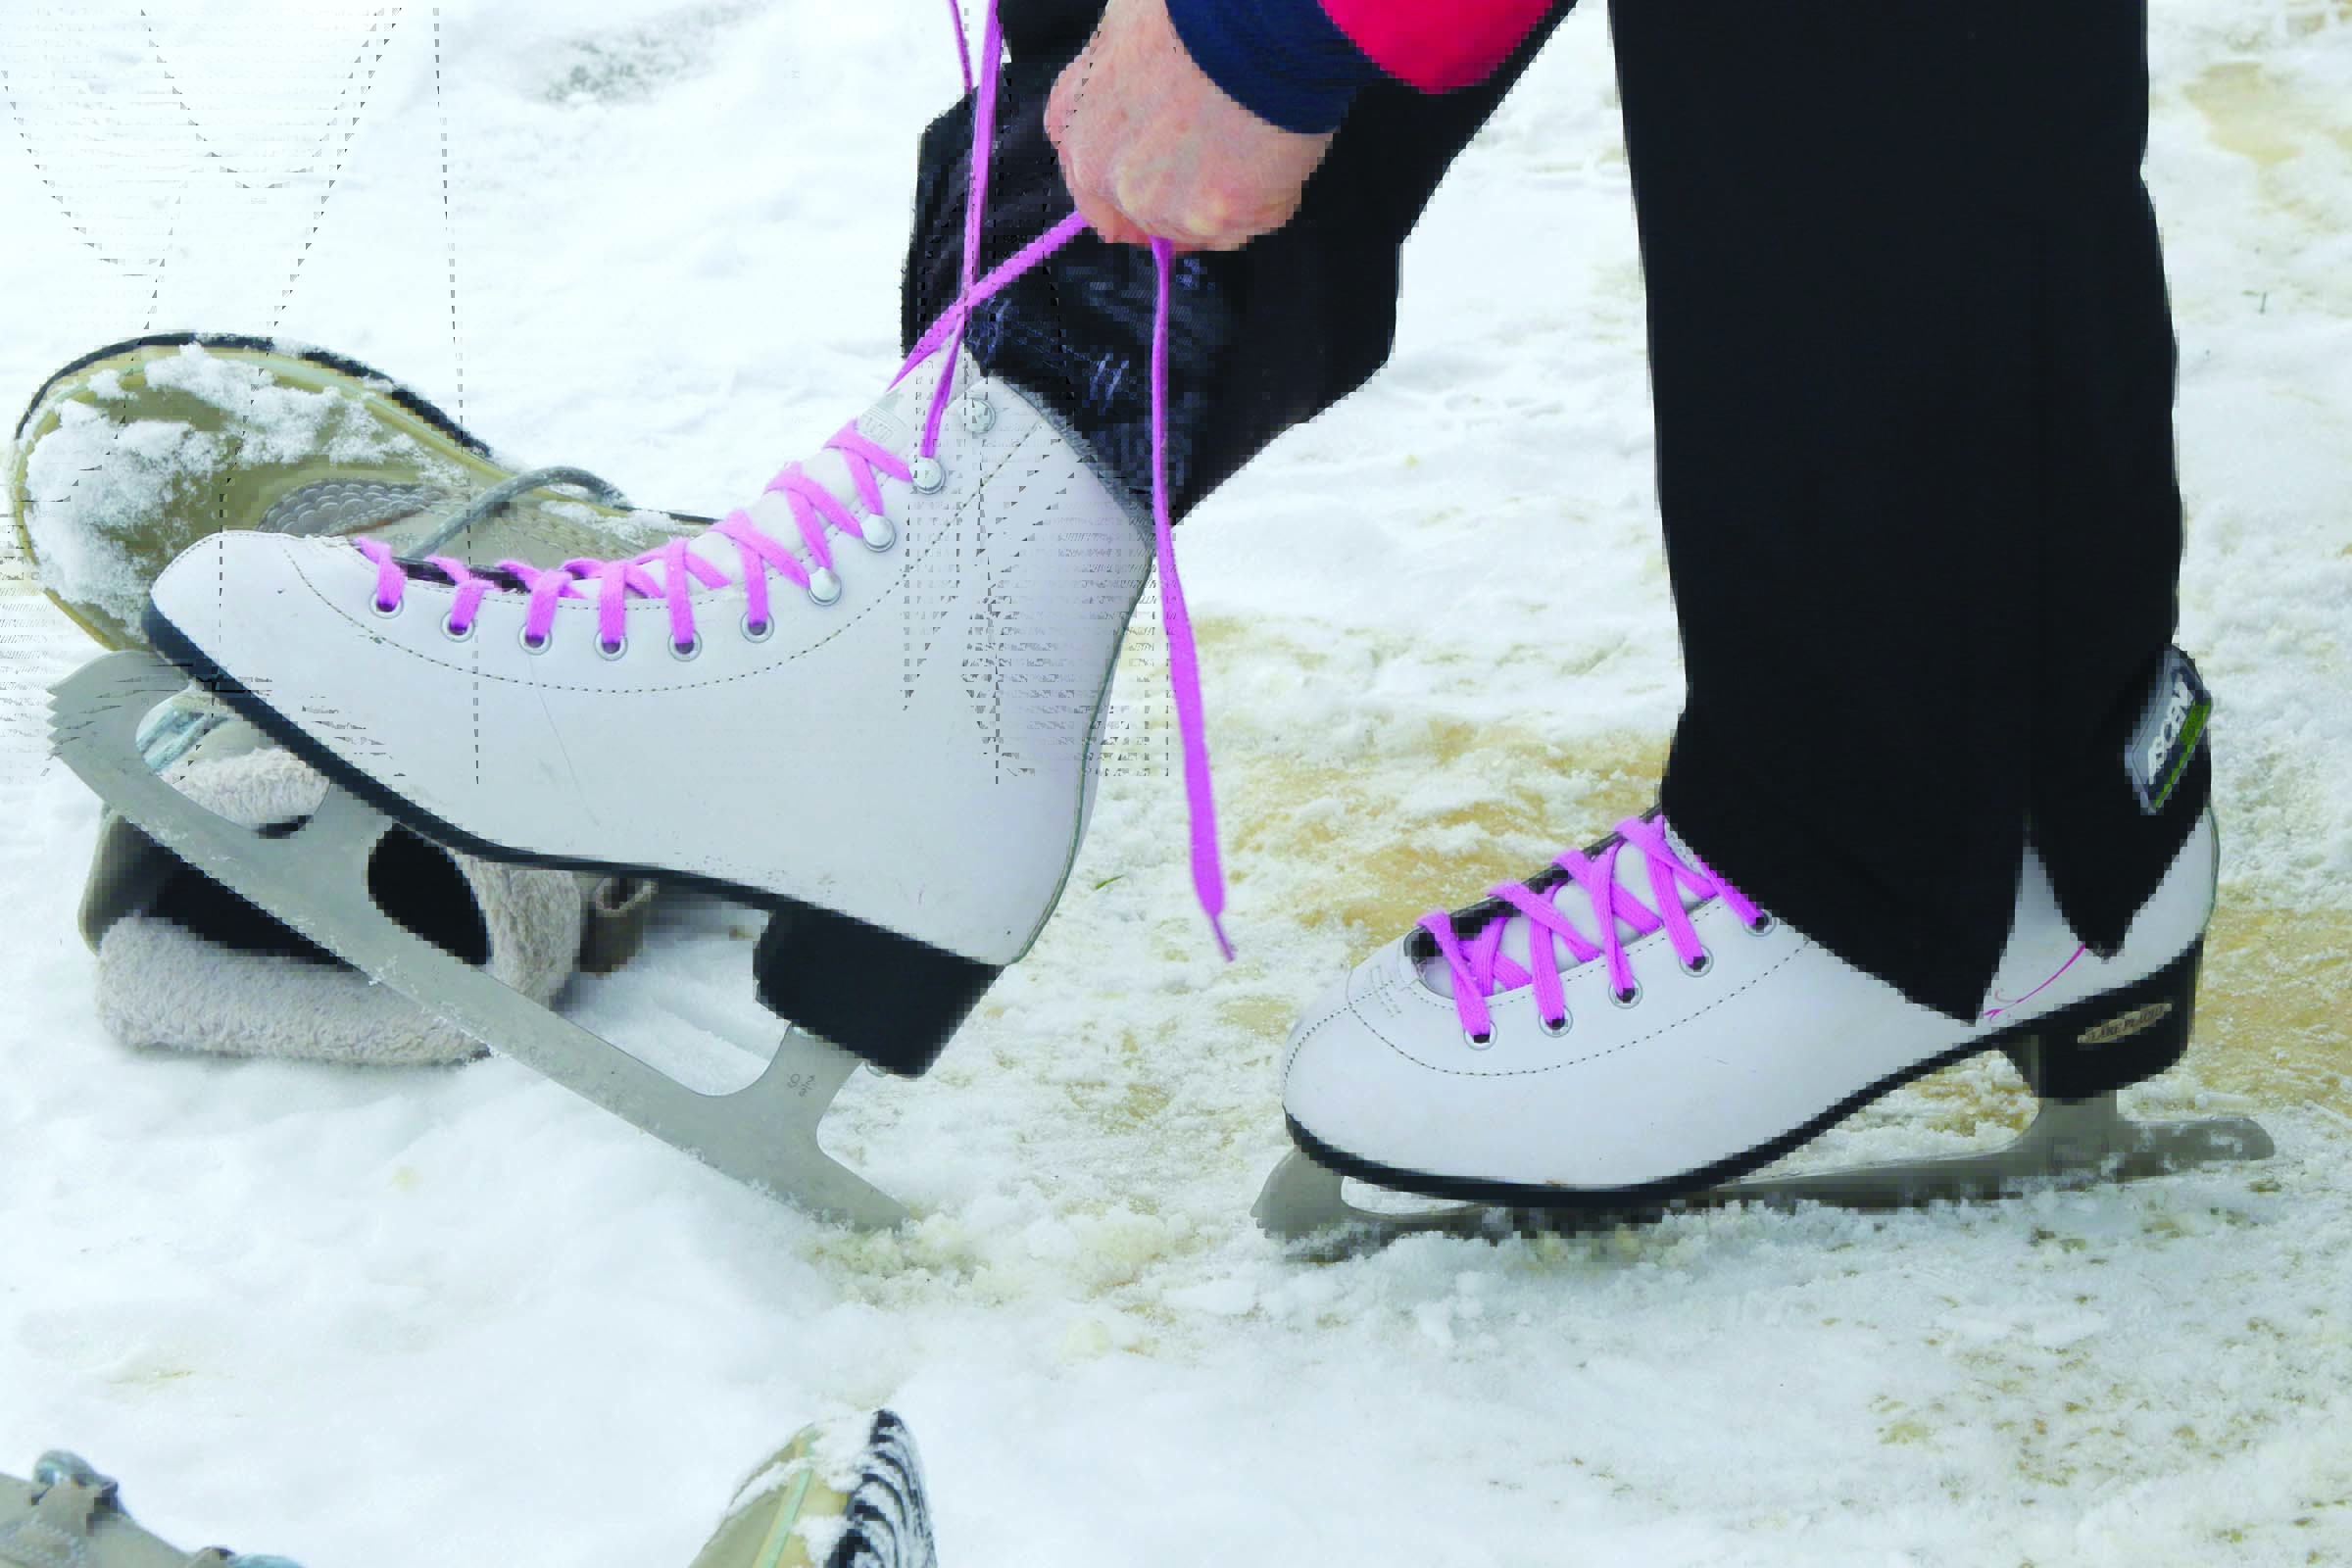 Where To Ice Skate This Winter